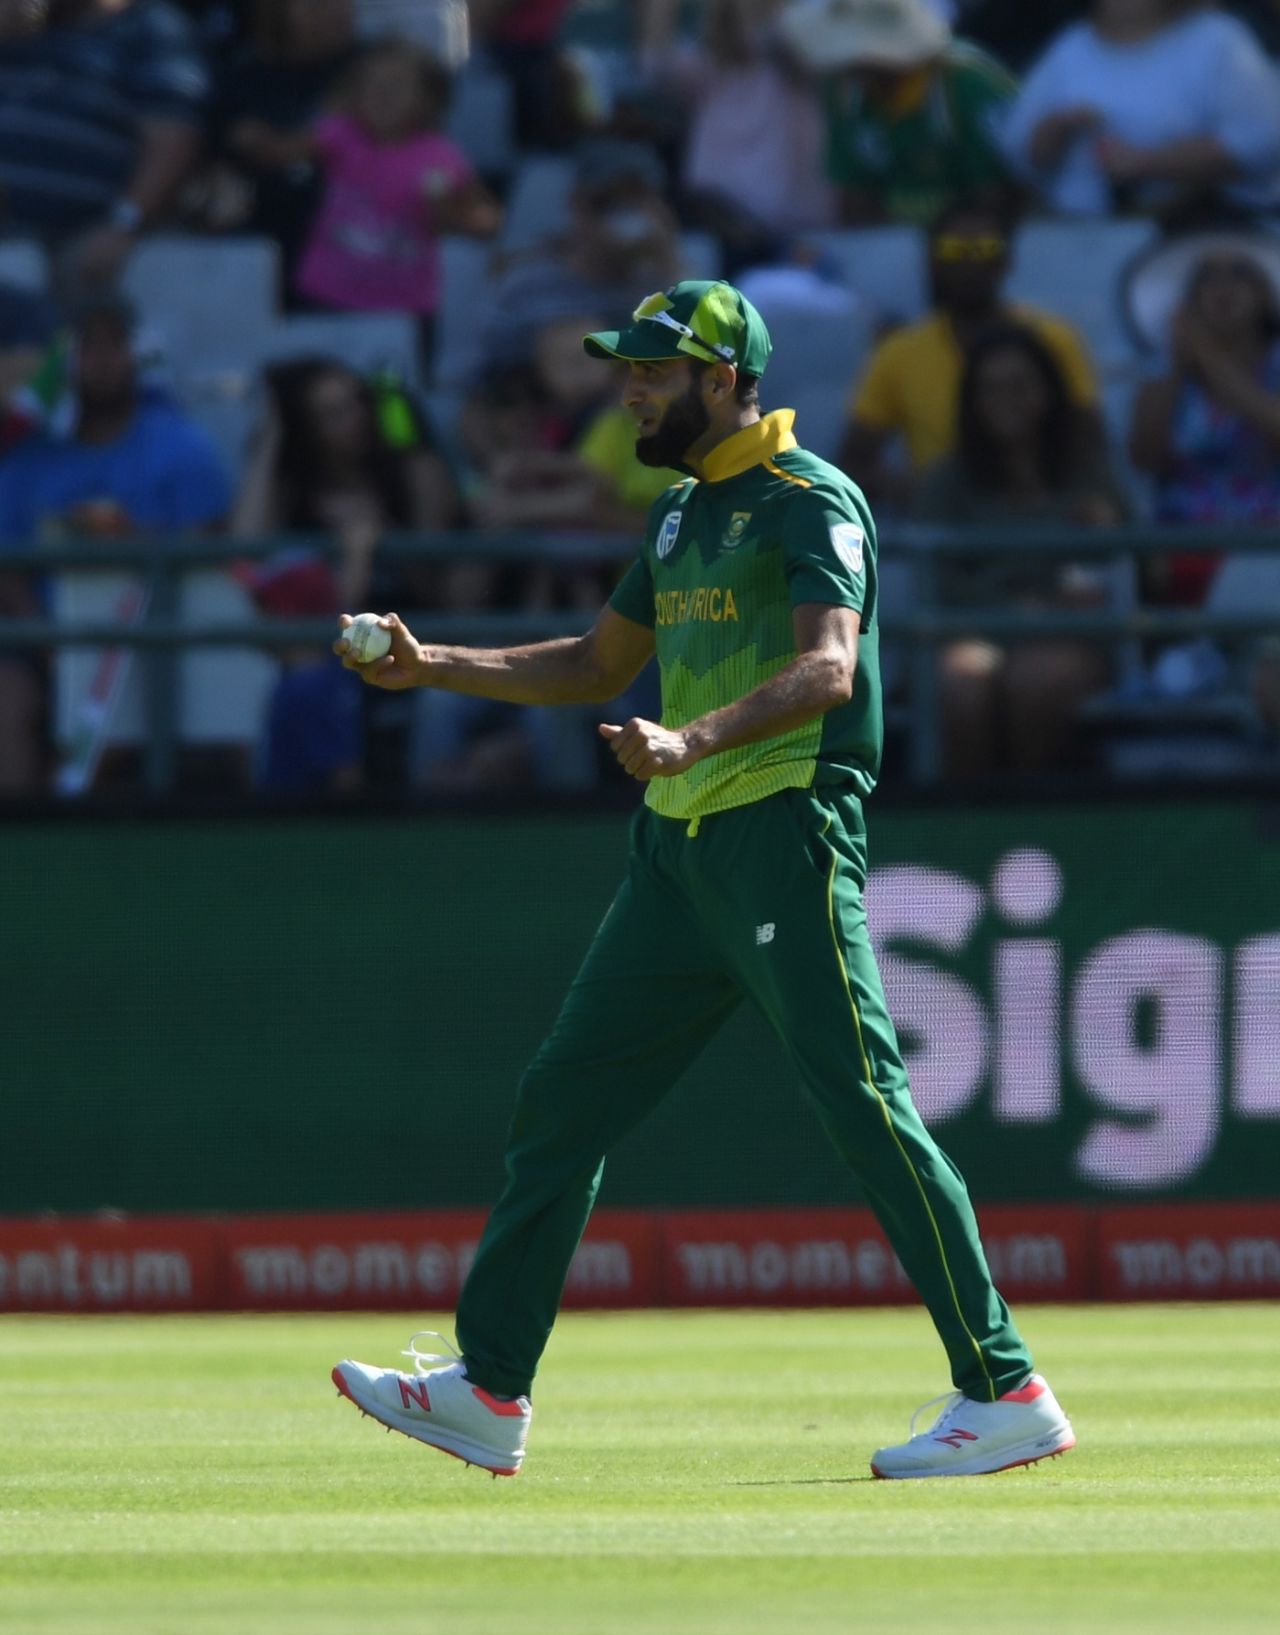 Imran Tahir is pumped after taking a good catch, South Africa v Sri Lanka, 5th ODI, Cape Town, March 16, 2019